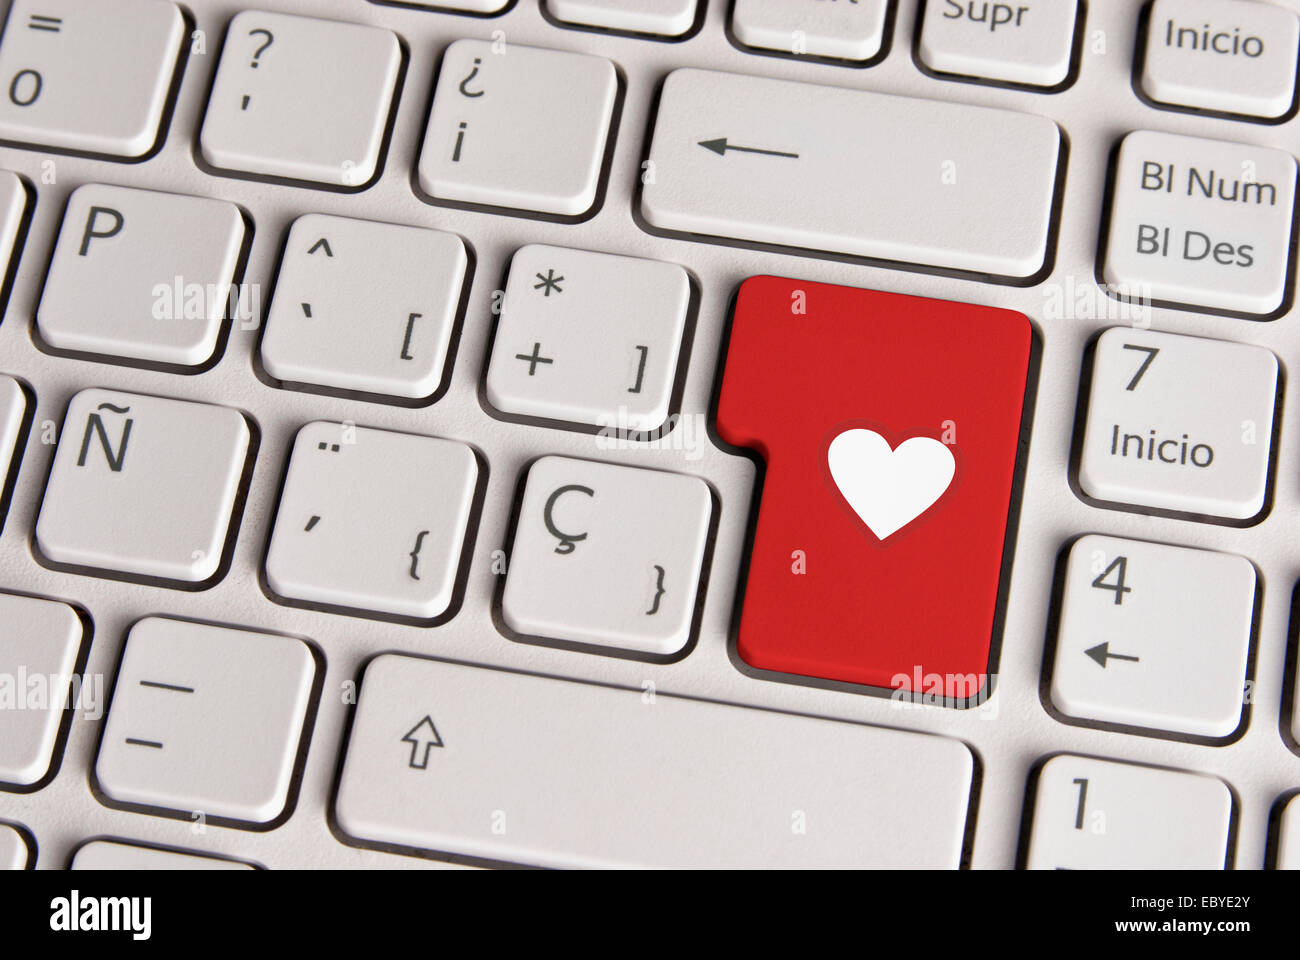 Spanish keyboard with love concept heart shape icon over red background button. Image with clipping path for easy change the key Stock Photo